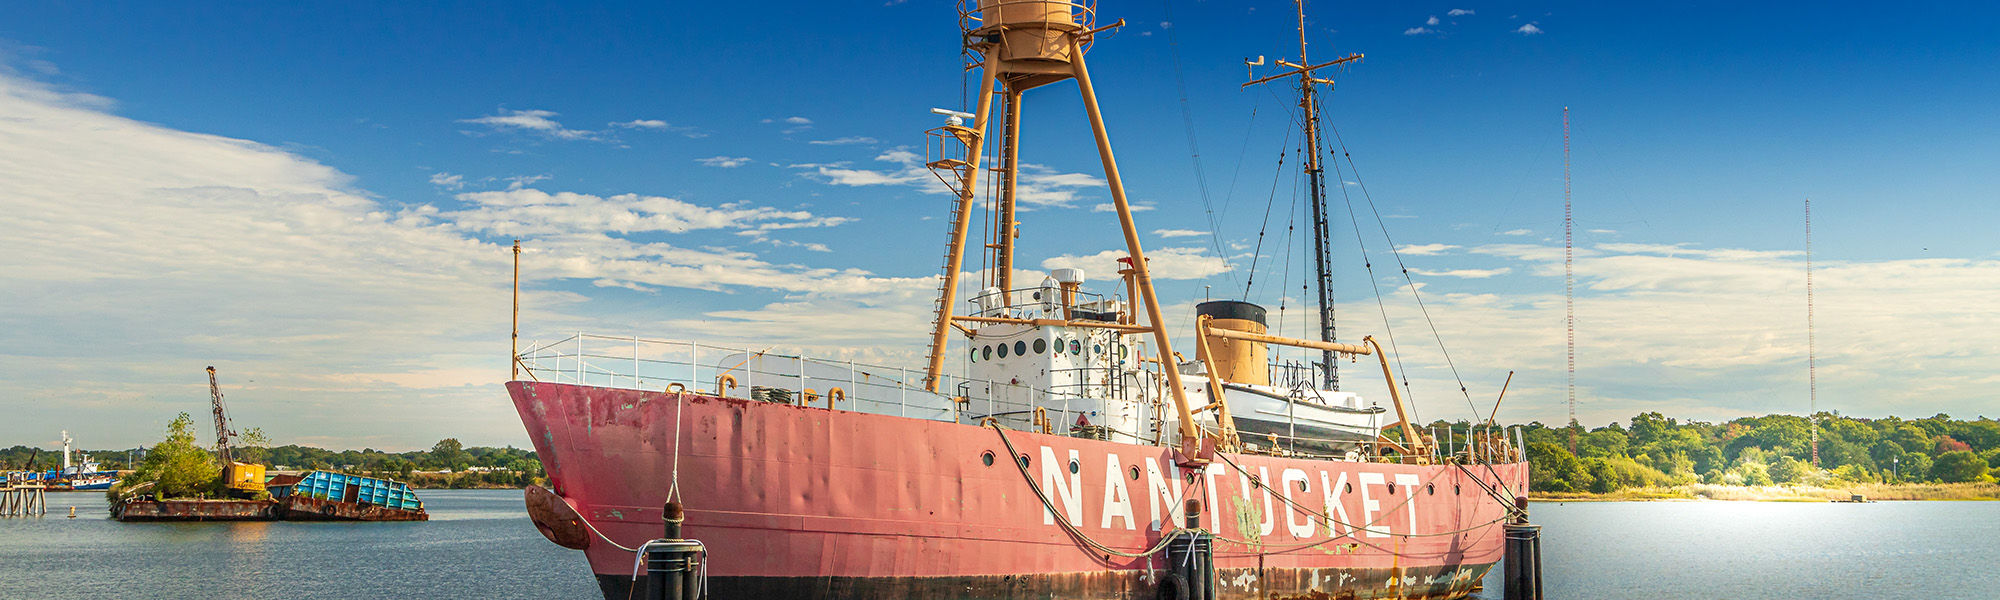 My trip to the New Bedford Lightship